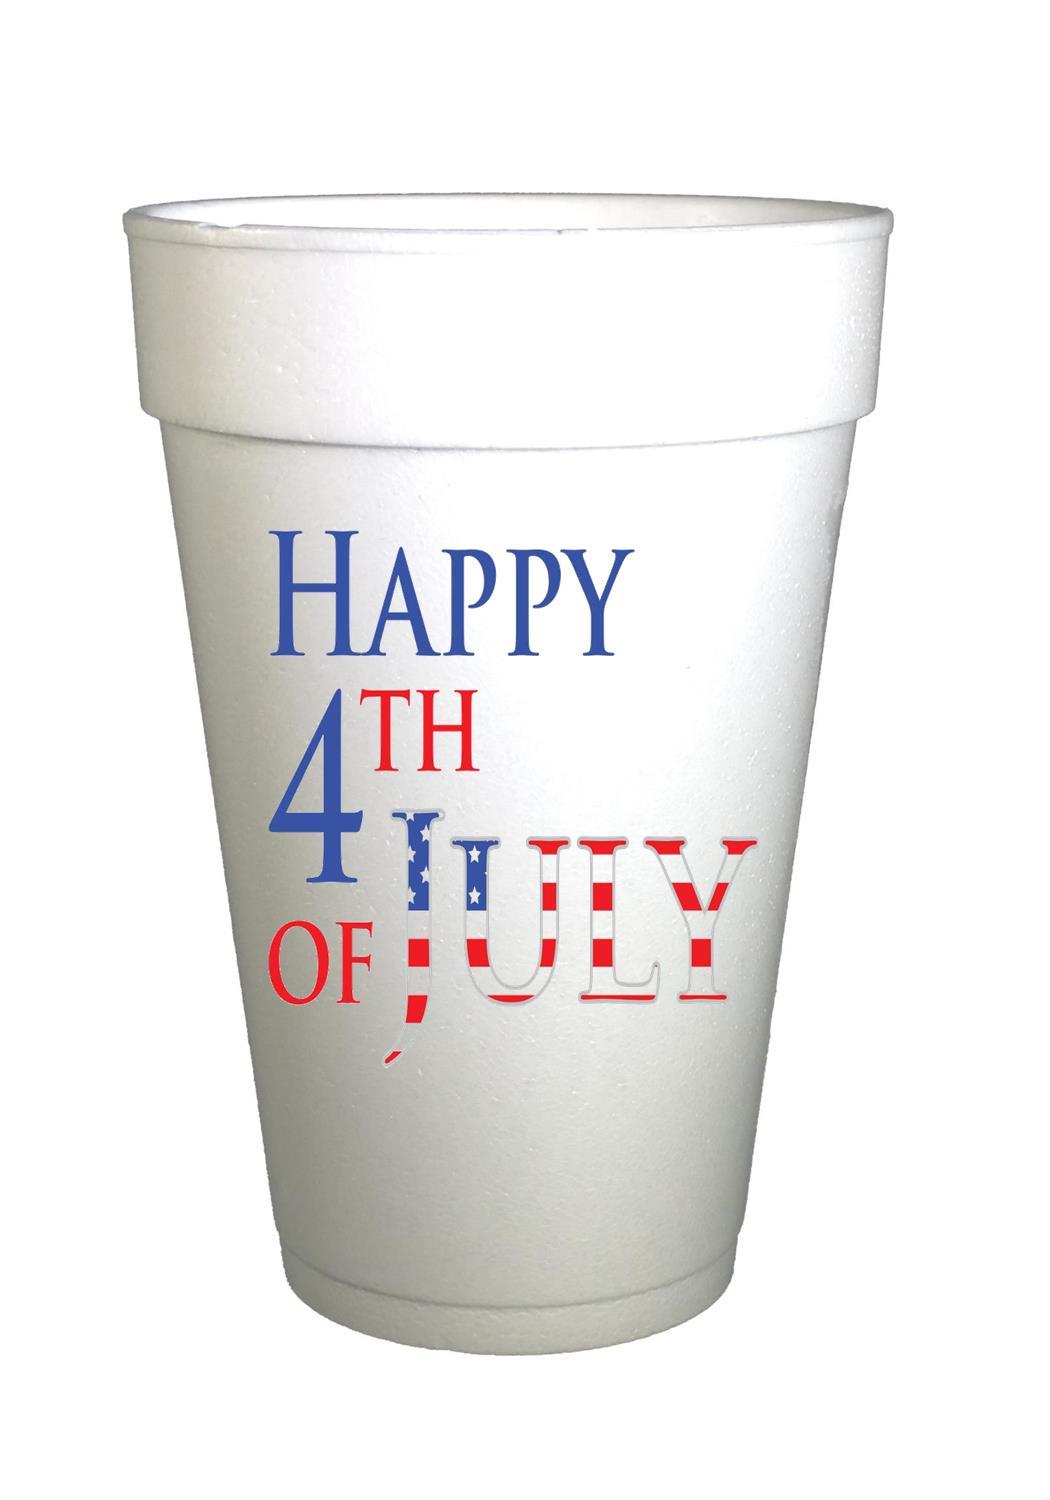 styrofoam cups with red, white and blue happy 4th of july